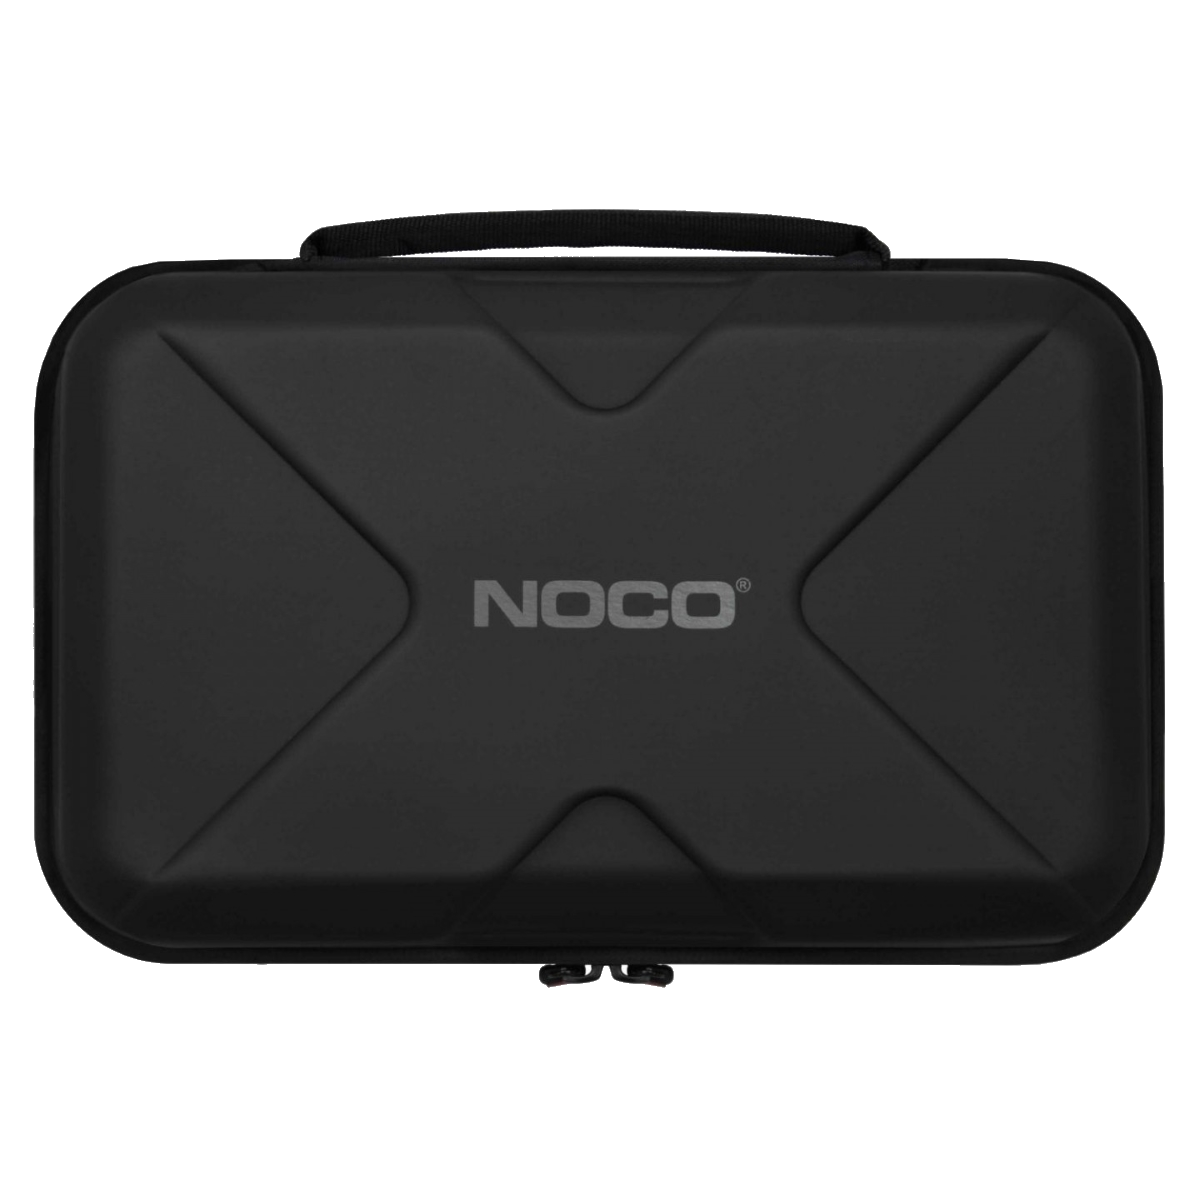 Noco Protection Case for GB150